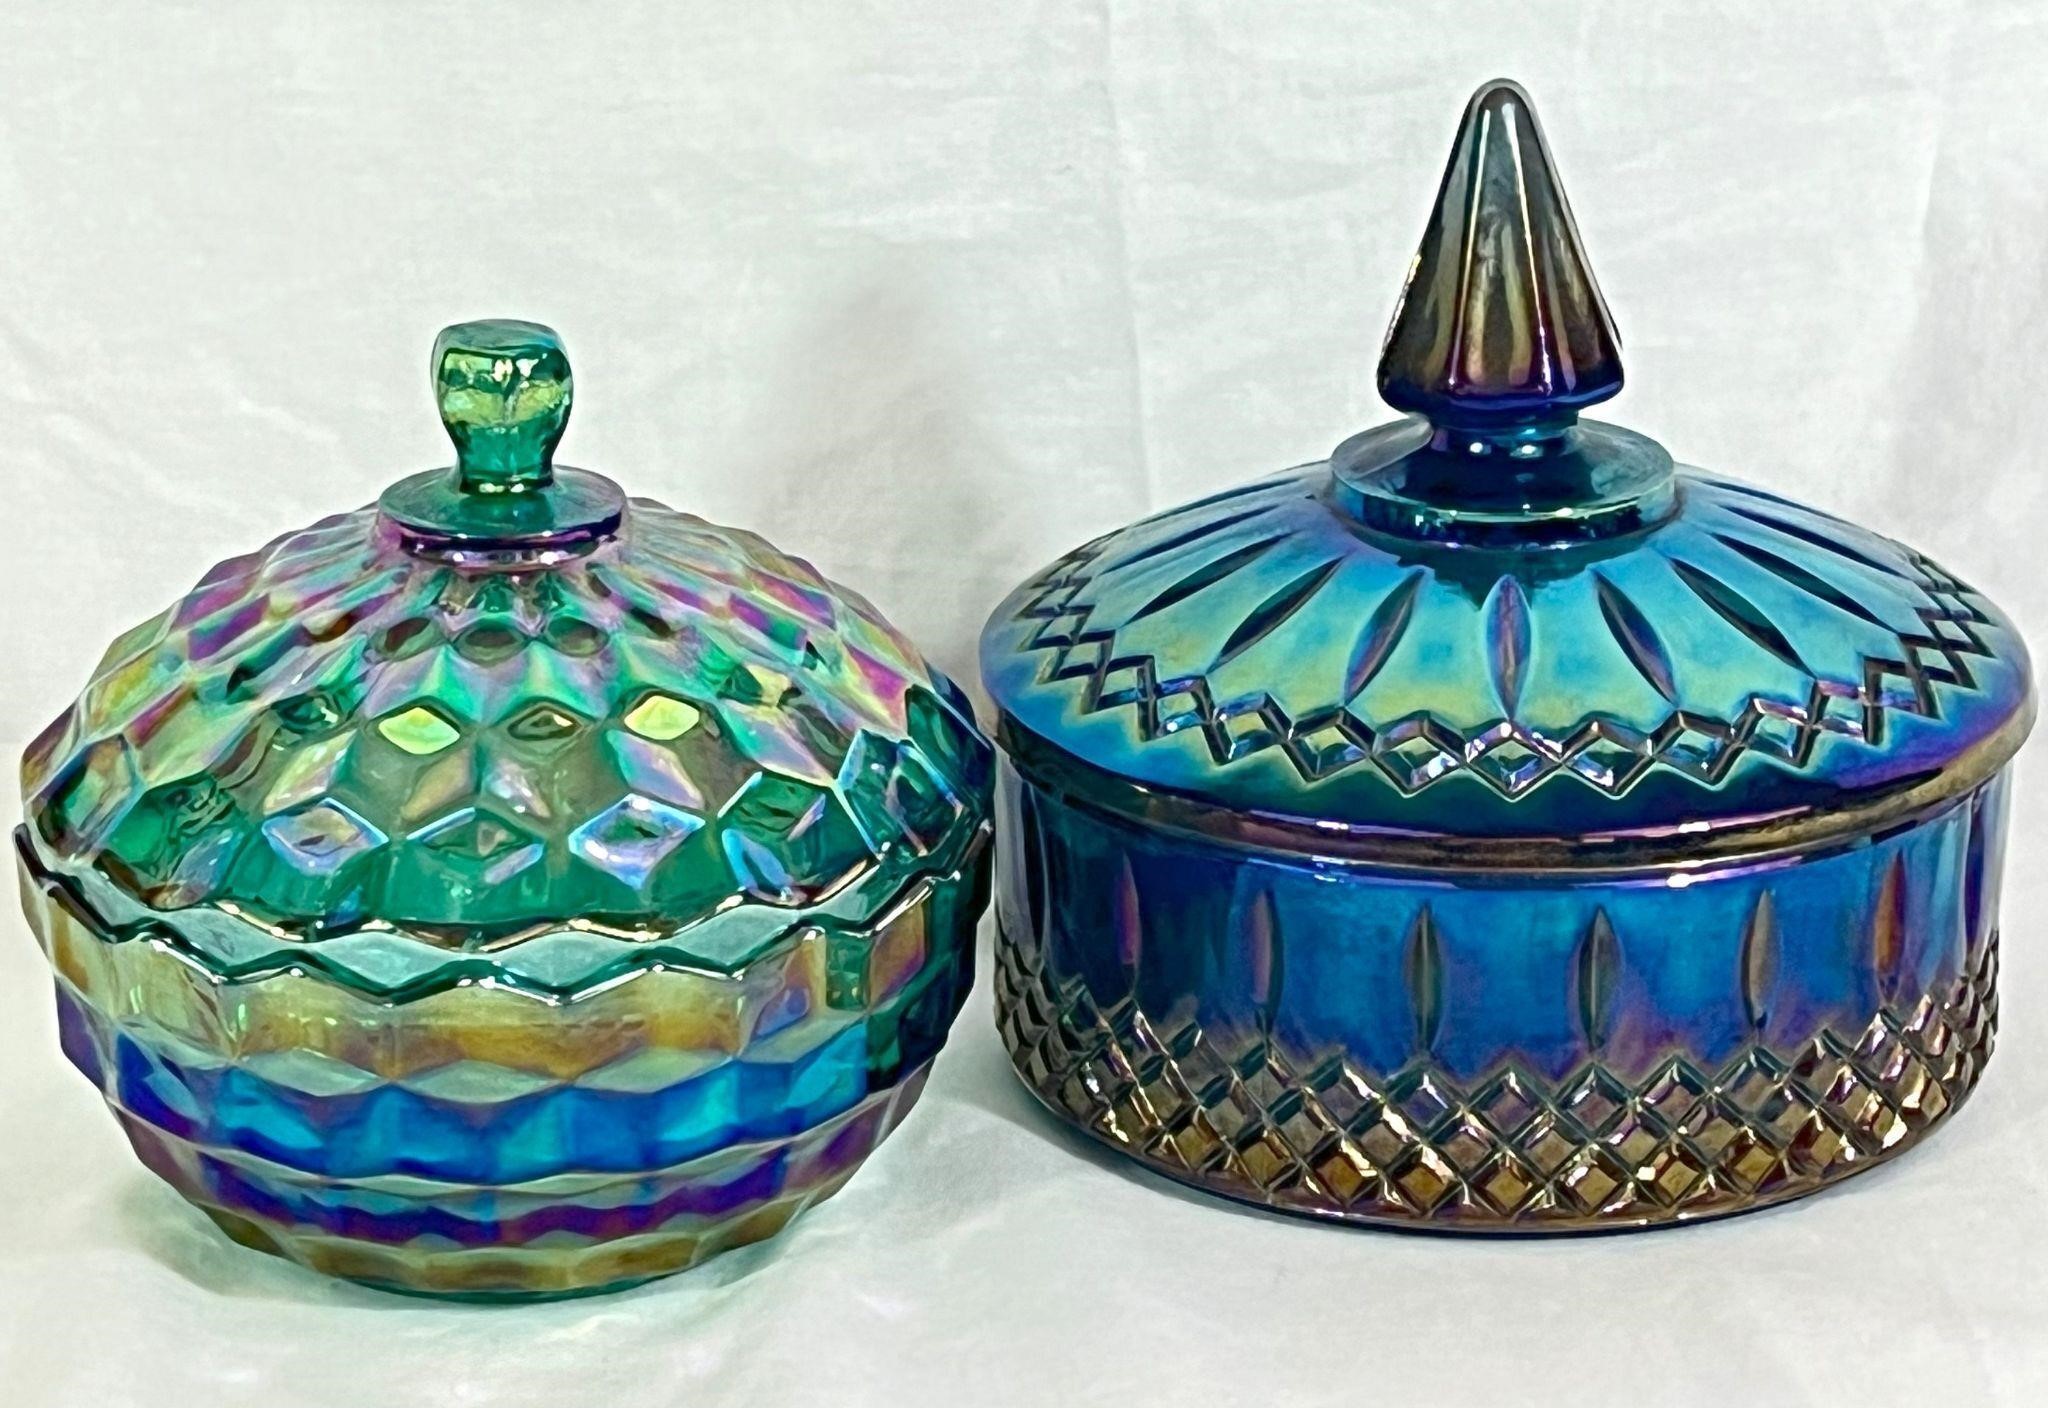 Pr. Indiana "Peacock" Carnival Glass Candy Dishes